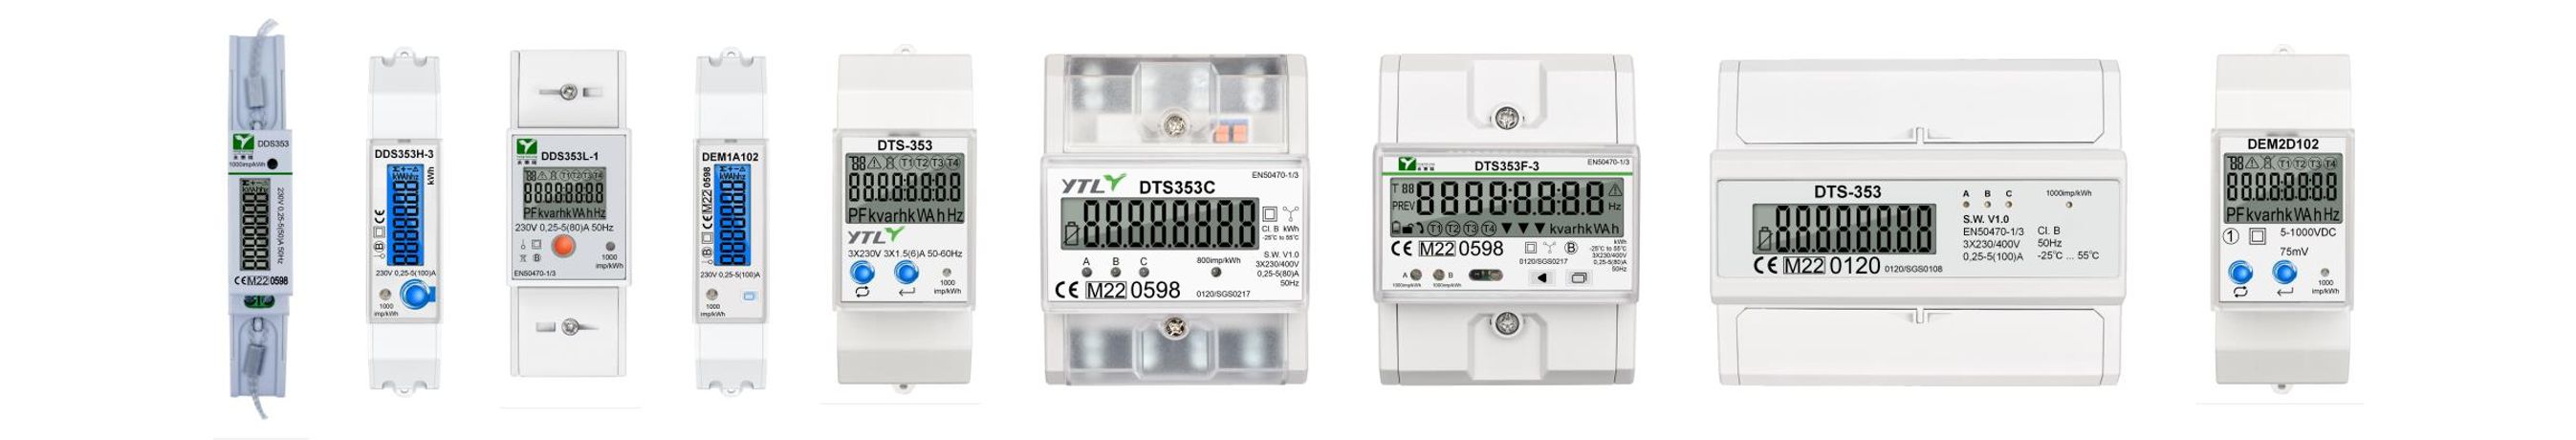 Huge growth in the energy meter market in four years, are you ready?-3